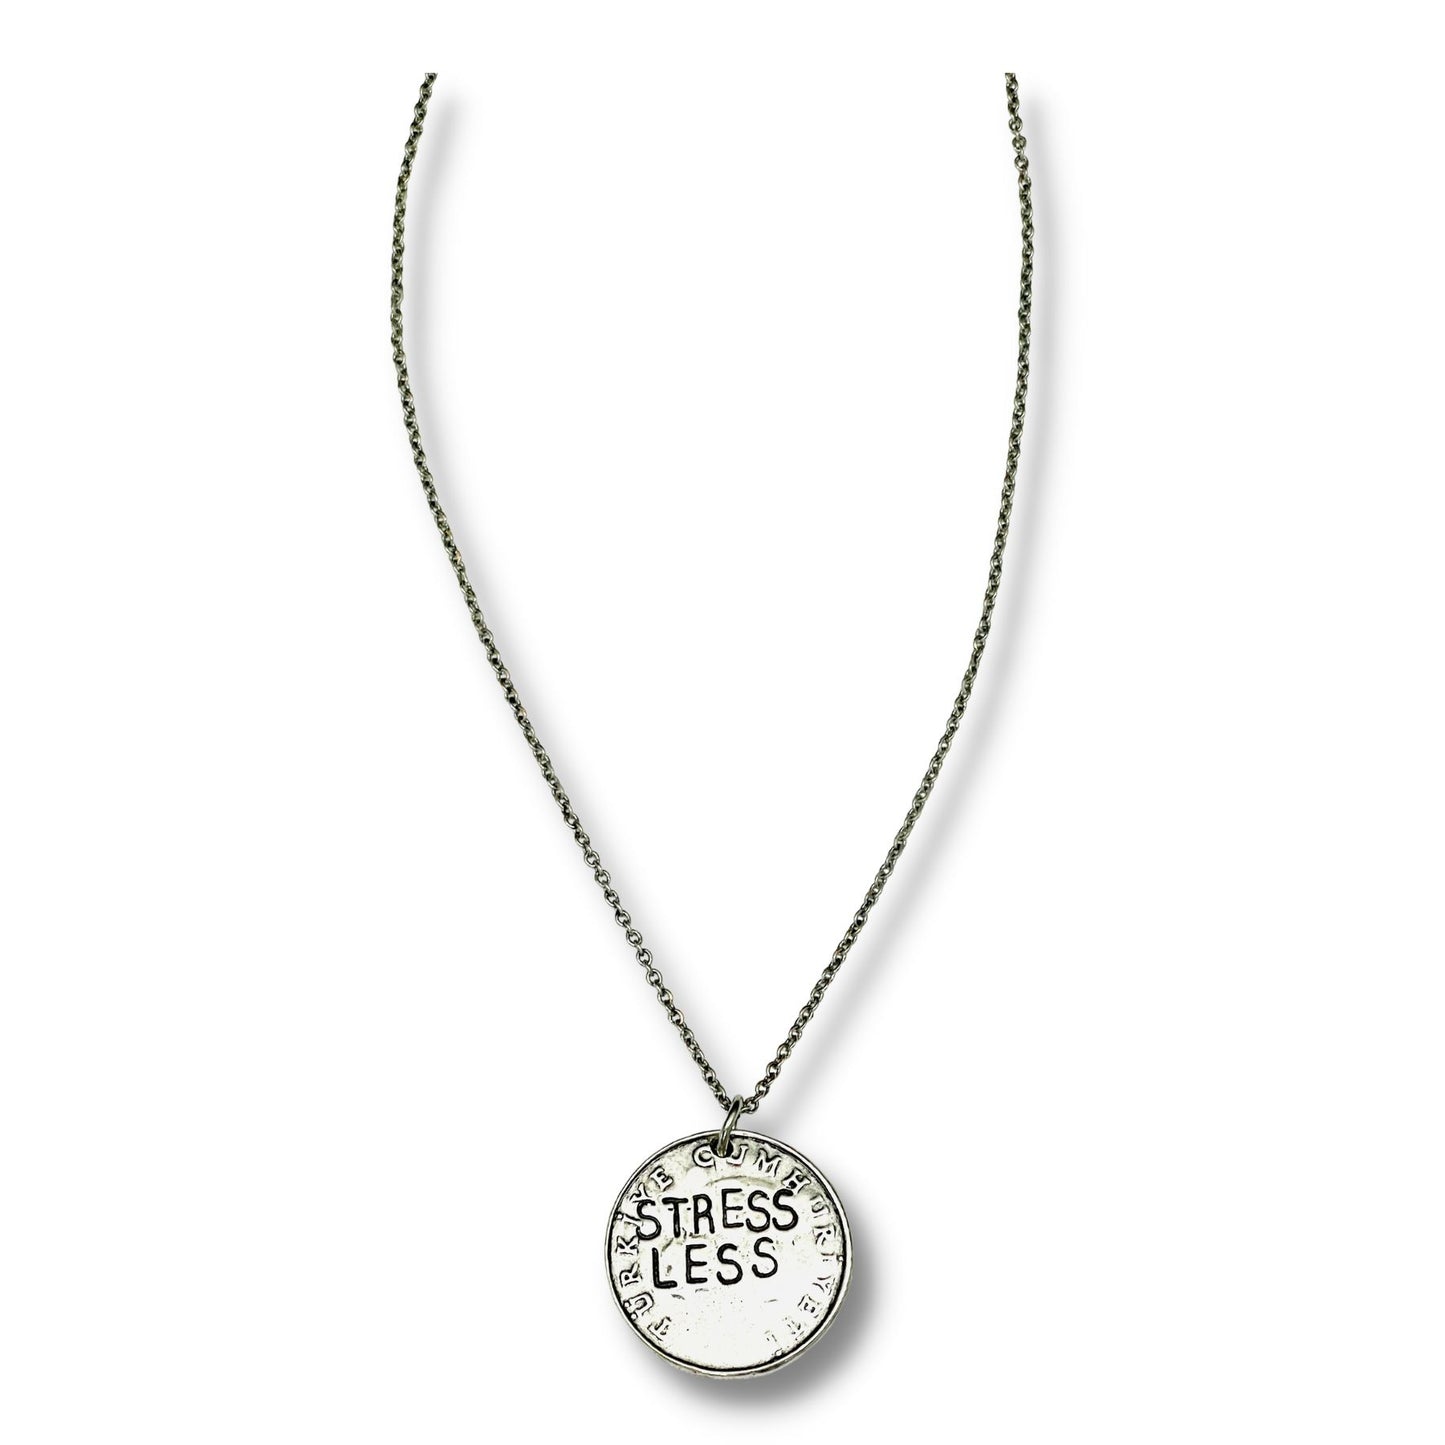 Stress Less/Don't Panic Hand Stamped Pendant Necklace